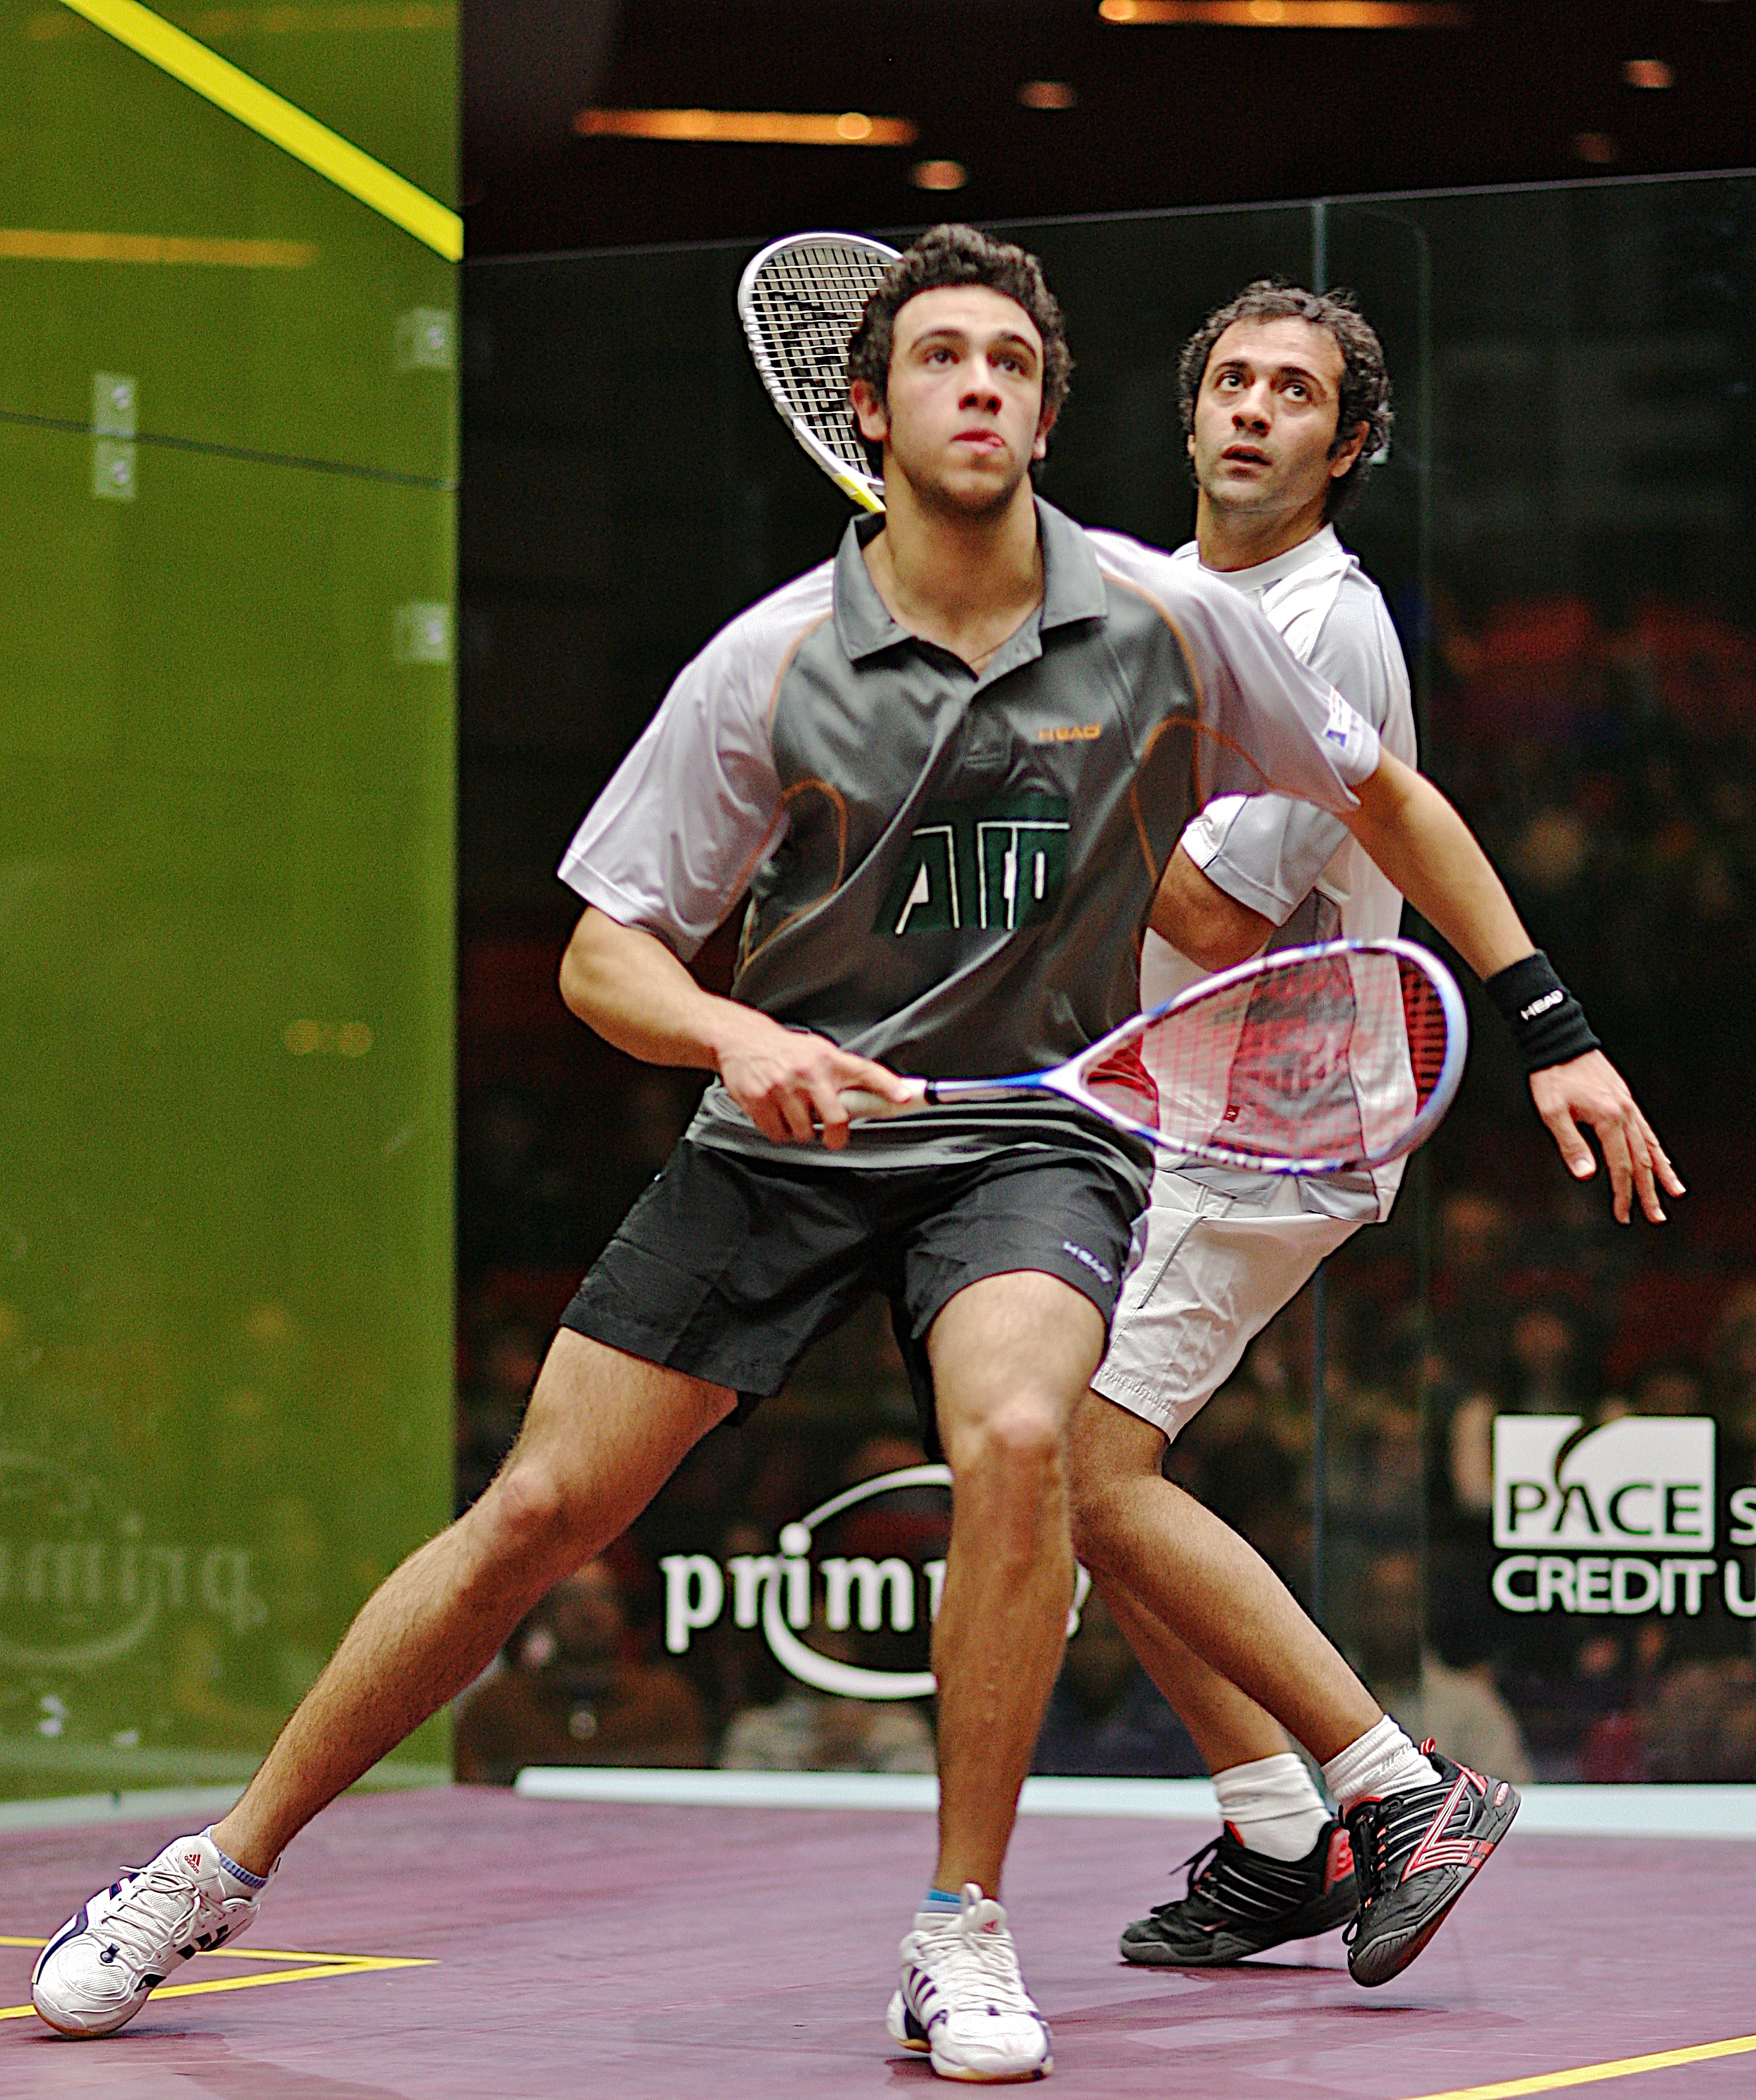 After an all-Egyptian semifinal round, the World No. 2 Ramy Ashour (L) destroyed World No. 1, Amr Shabana, in a 38-minute, three-game final in Toronto. For Ashour, the PACE title was his second in the Players Cup Circuit after winning the Bear Stearns Tournament of Champions a month earlier.